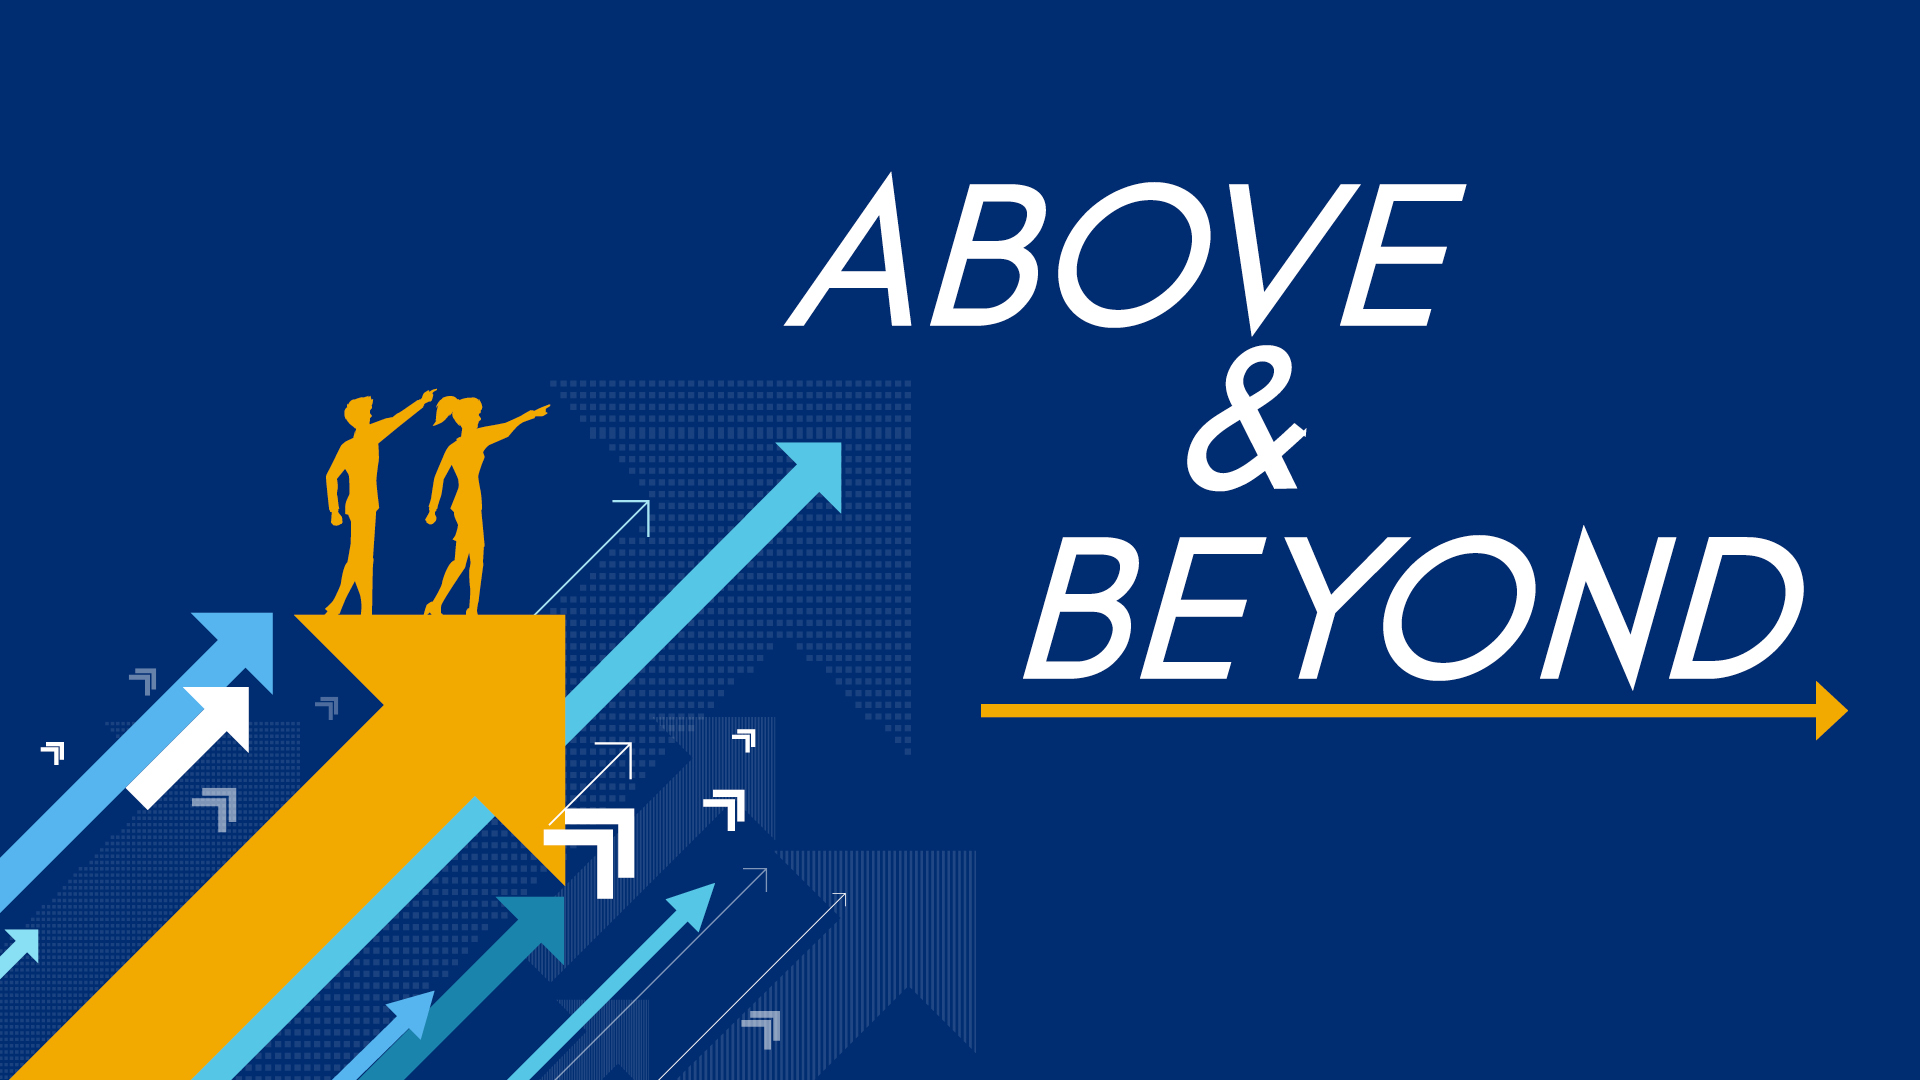 Above & Beyond Employee Recognition Program